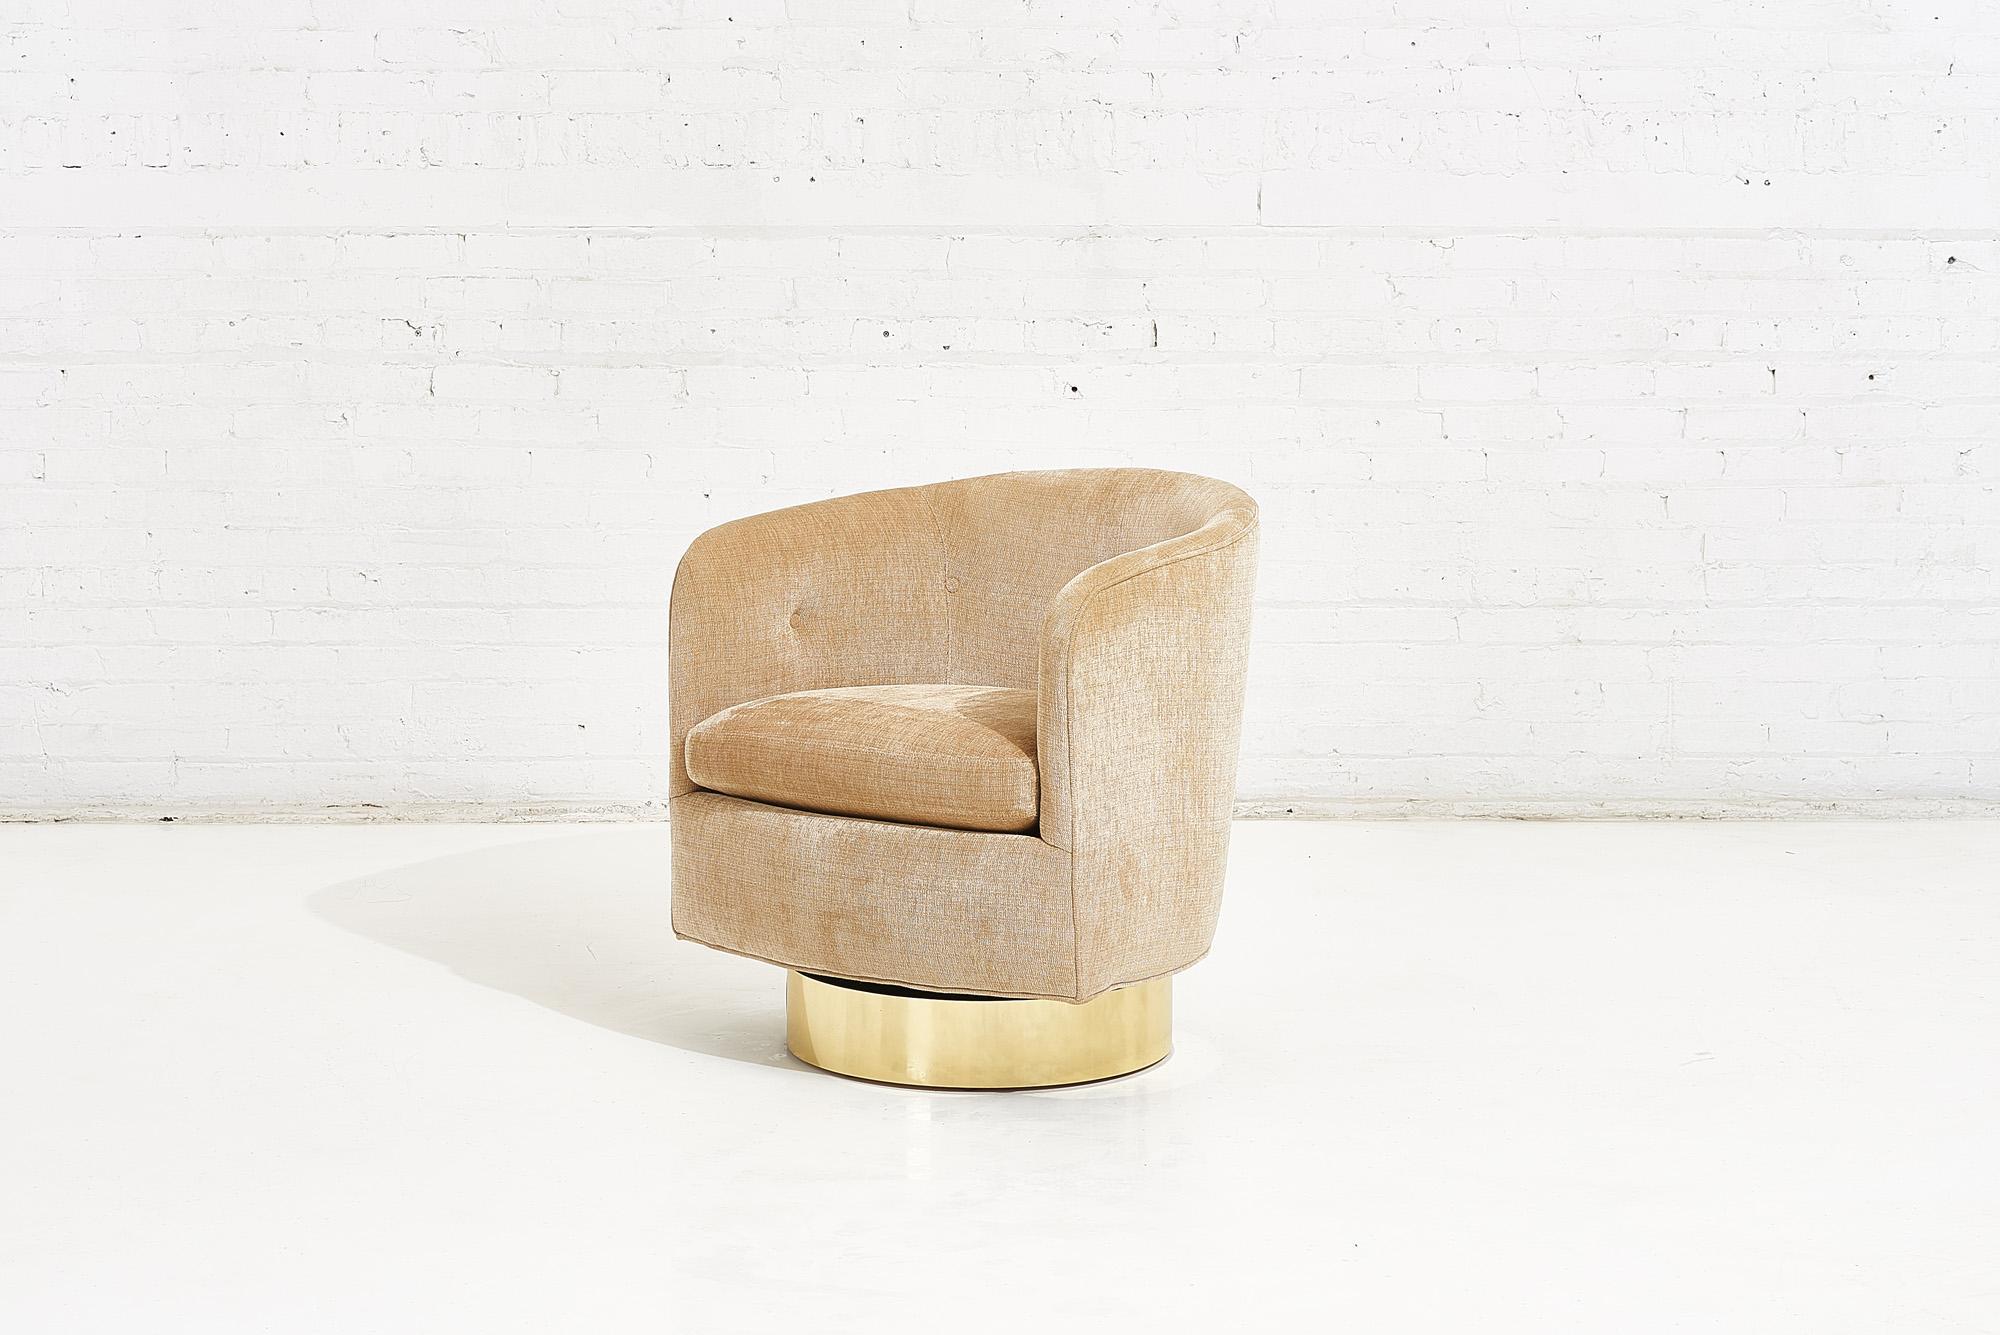 Milo Baughman for Thayer Coggin swivel chair with brass base, circa 1970’s. Original upholstery, new brass on base.